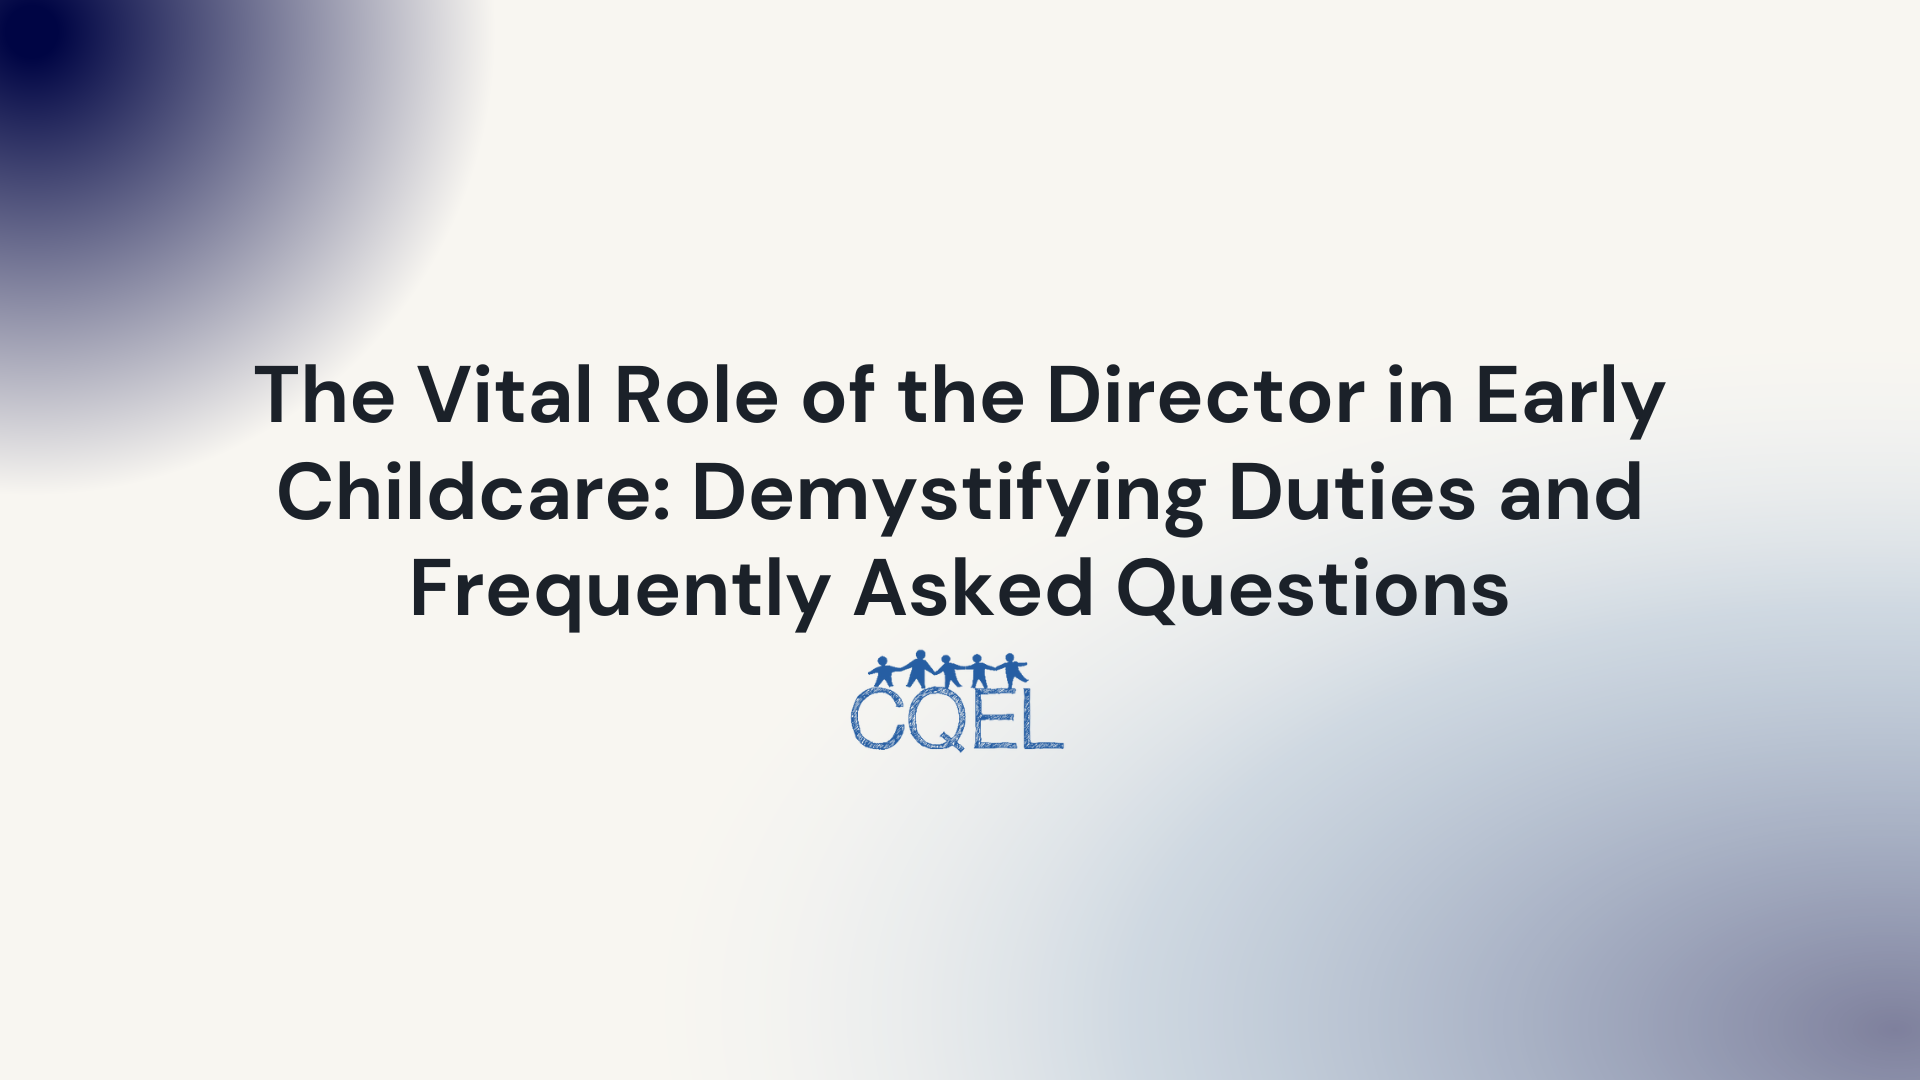 The Vital Role of the Director in Early Childcare: Demystifying Duties and Frequently Asked Questions